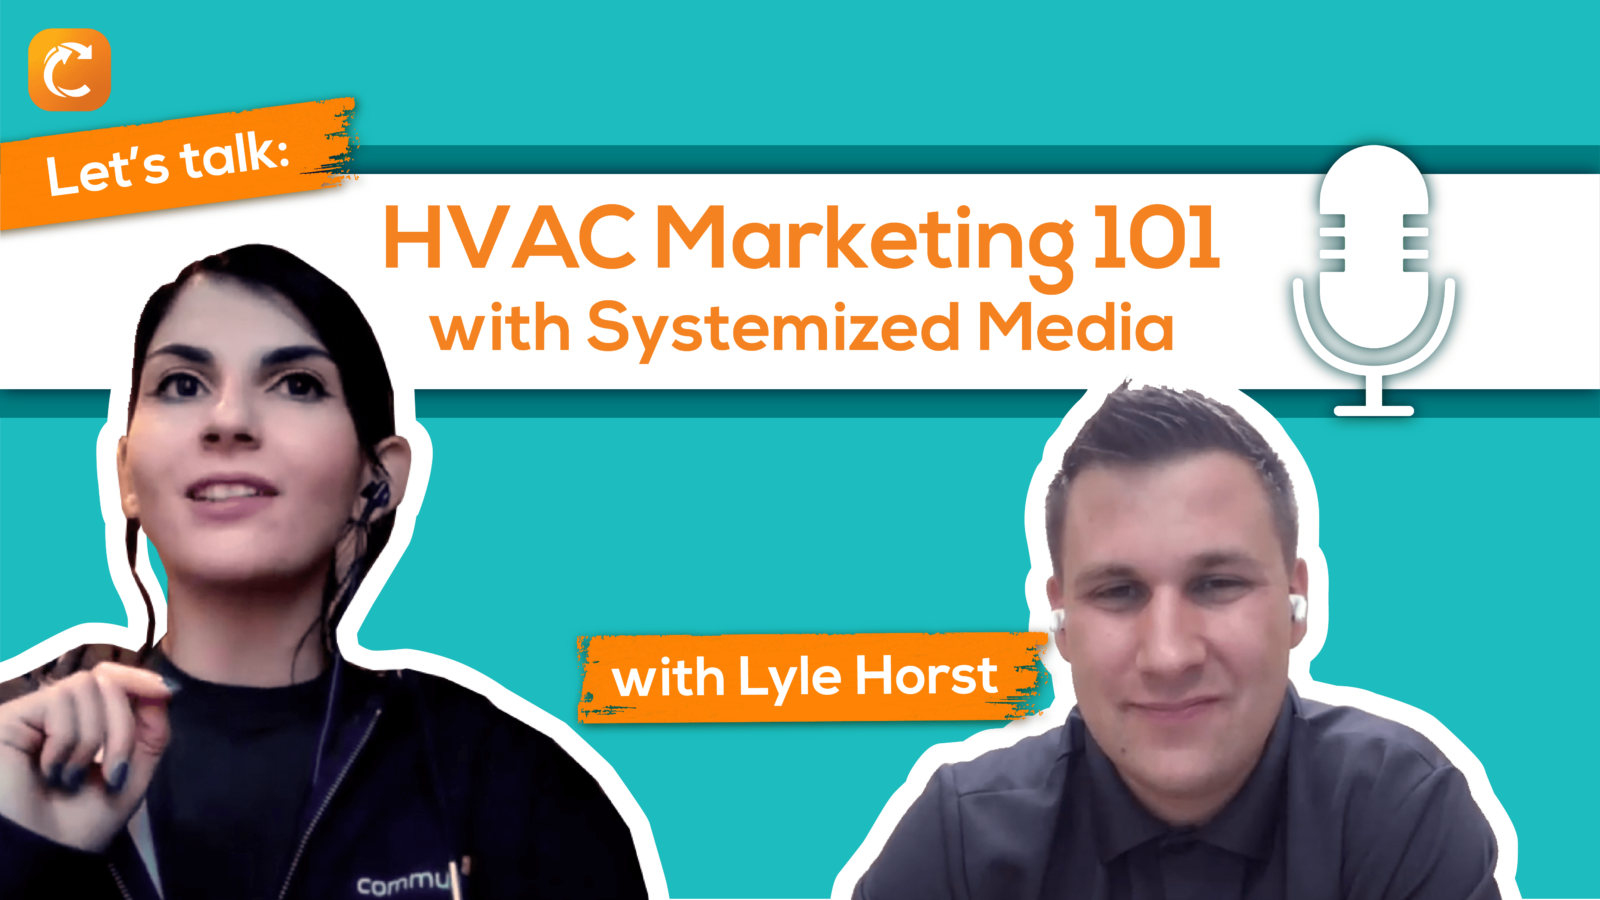 Let's Talk with Lyle Horst